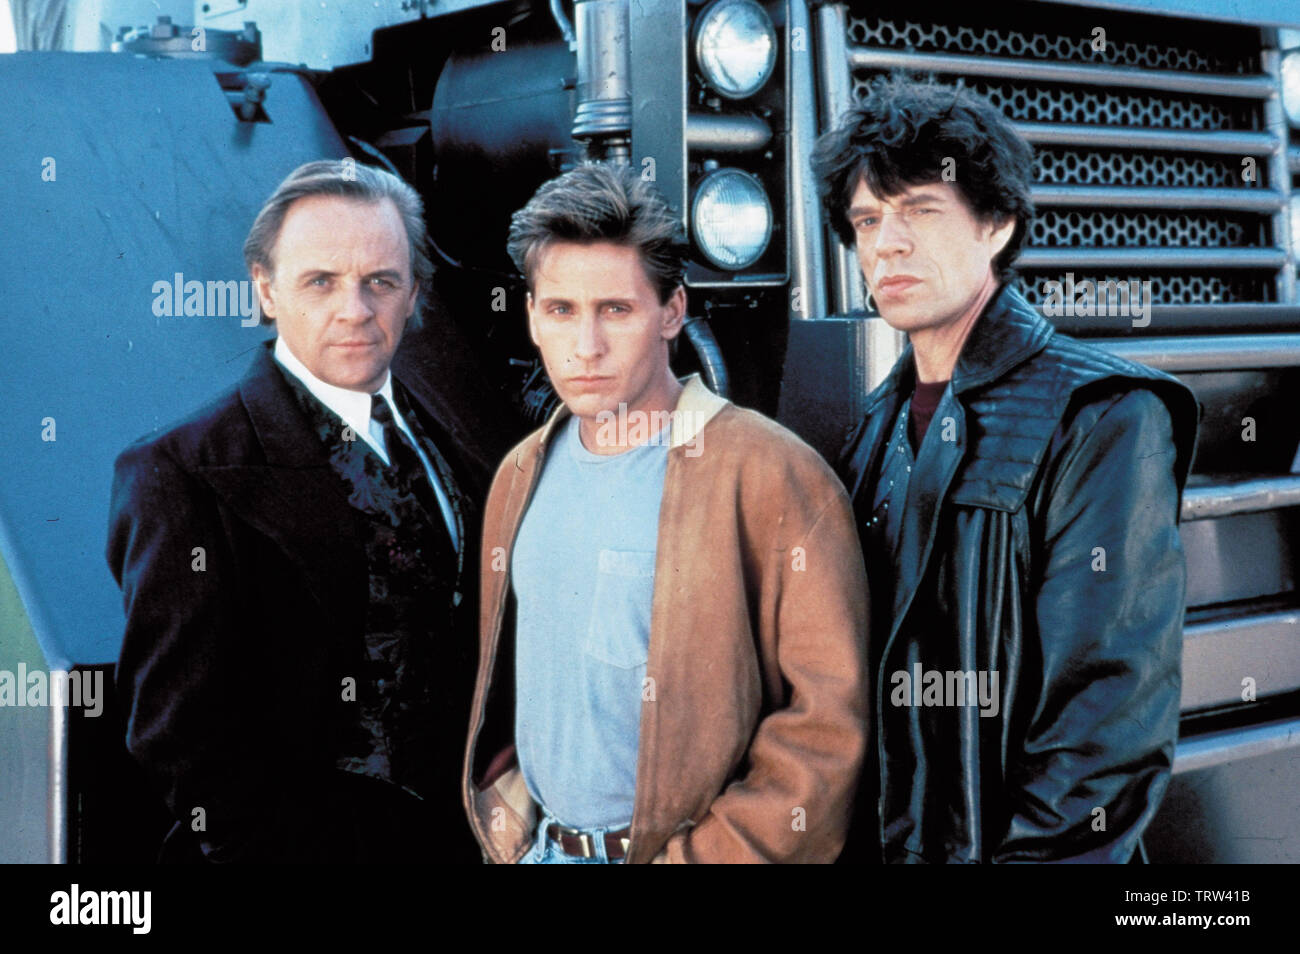 ANTHONY HOPKINS , EMILIO ESTEVEZ and MICK JAGGER in FREEJACK (1992). Copyright: Editorial use only. No merchandising or book covers. This is a publicly distributed handout. Access rights only, no license of copyright provided. Only to be reproduced in conjunction with promotion of this film. Credit: WARNER BROS/MORGAN CREEK / Album Stock Photo